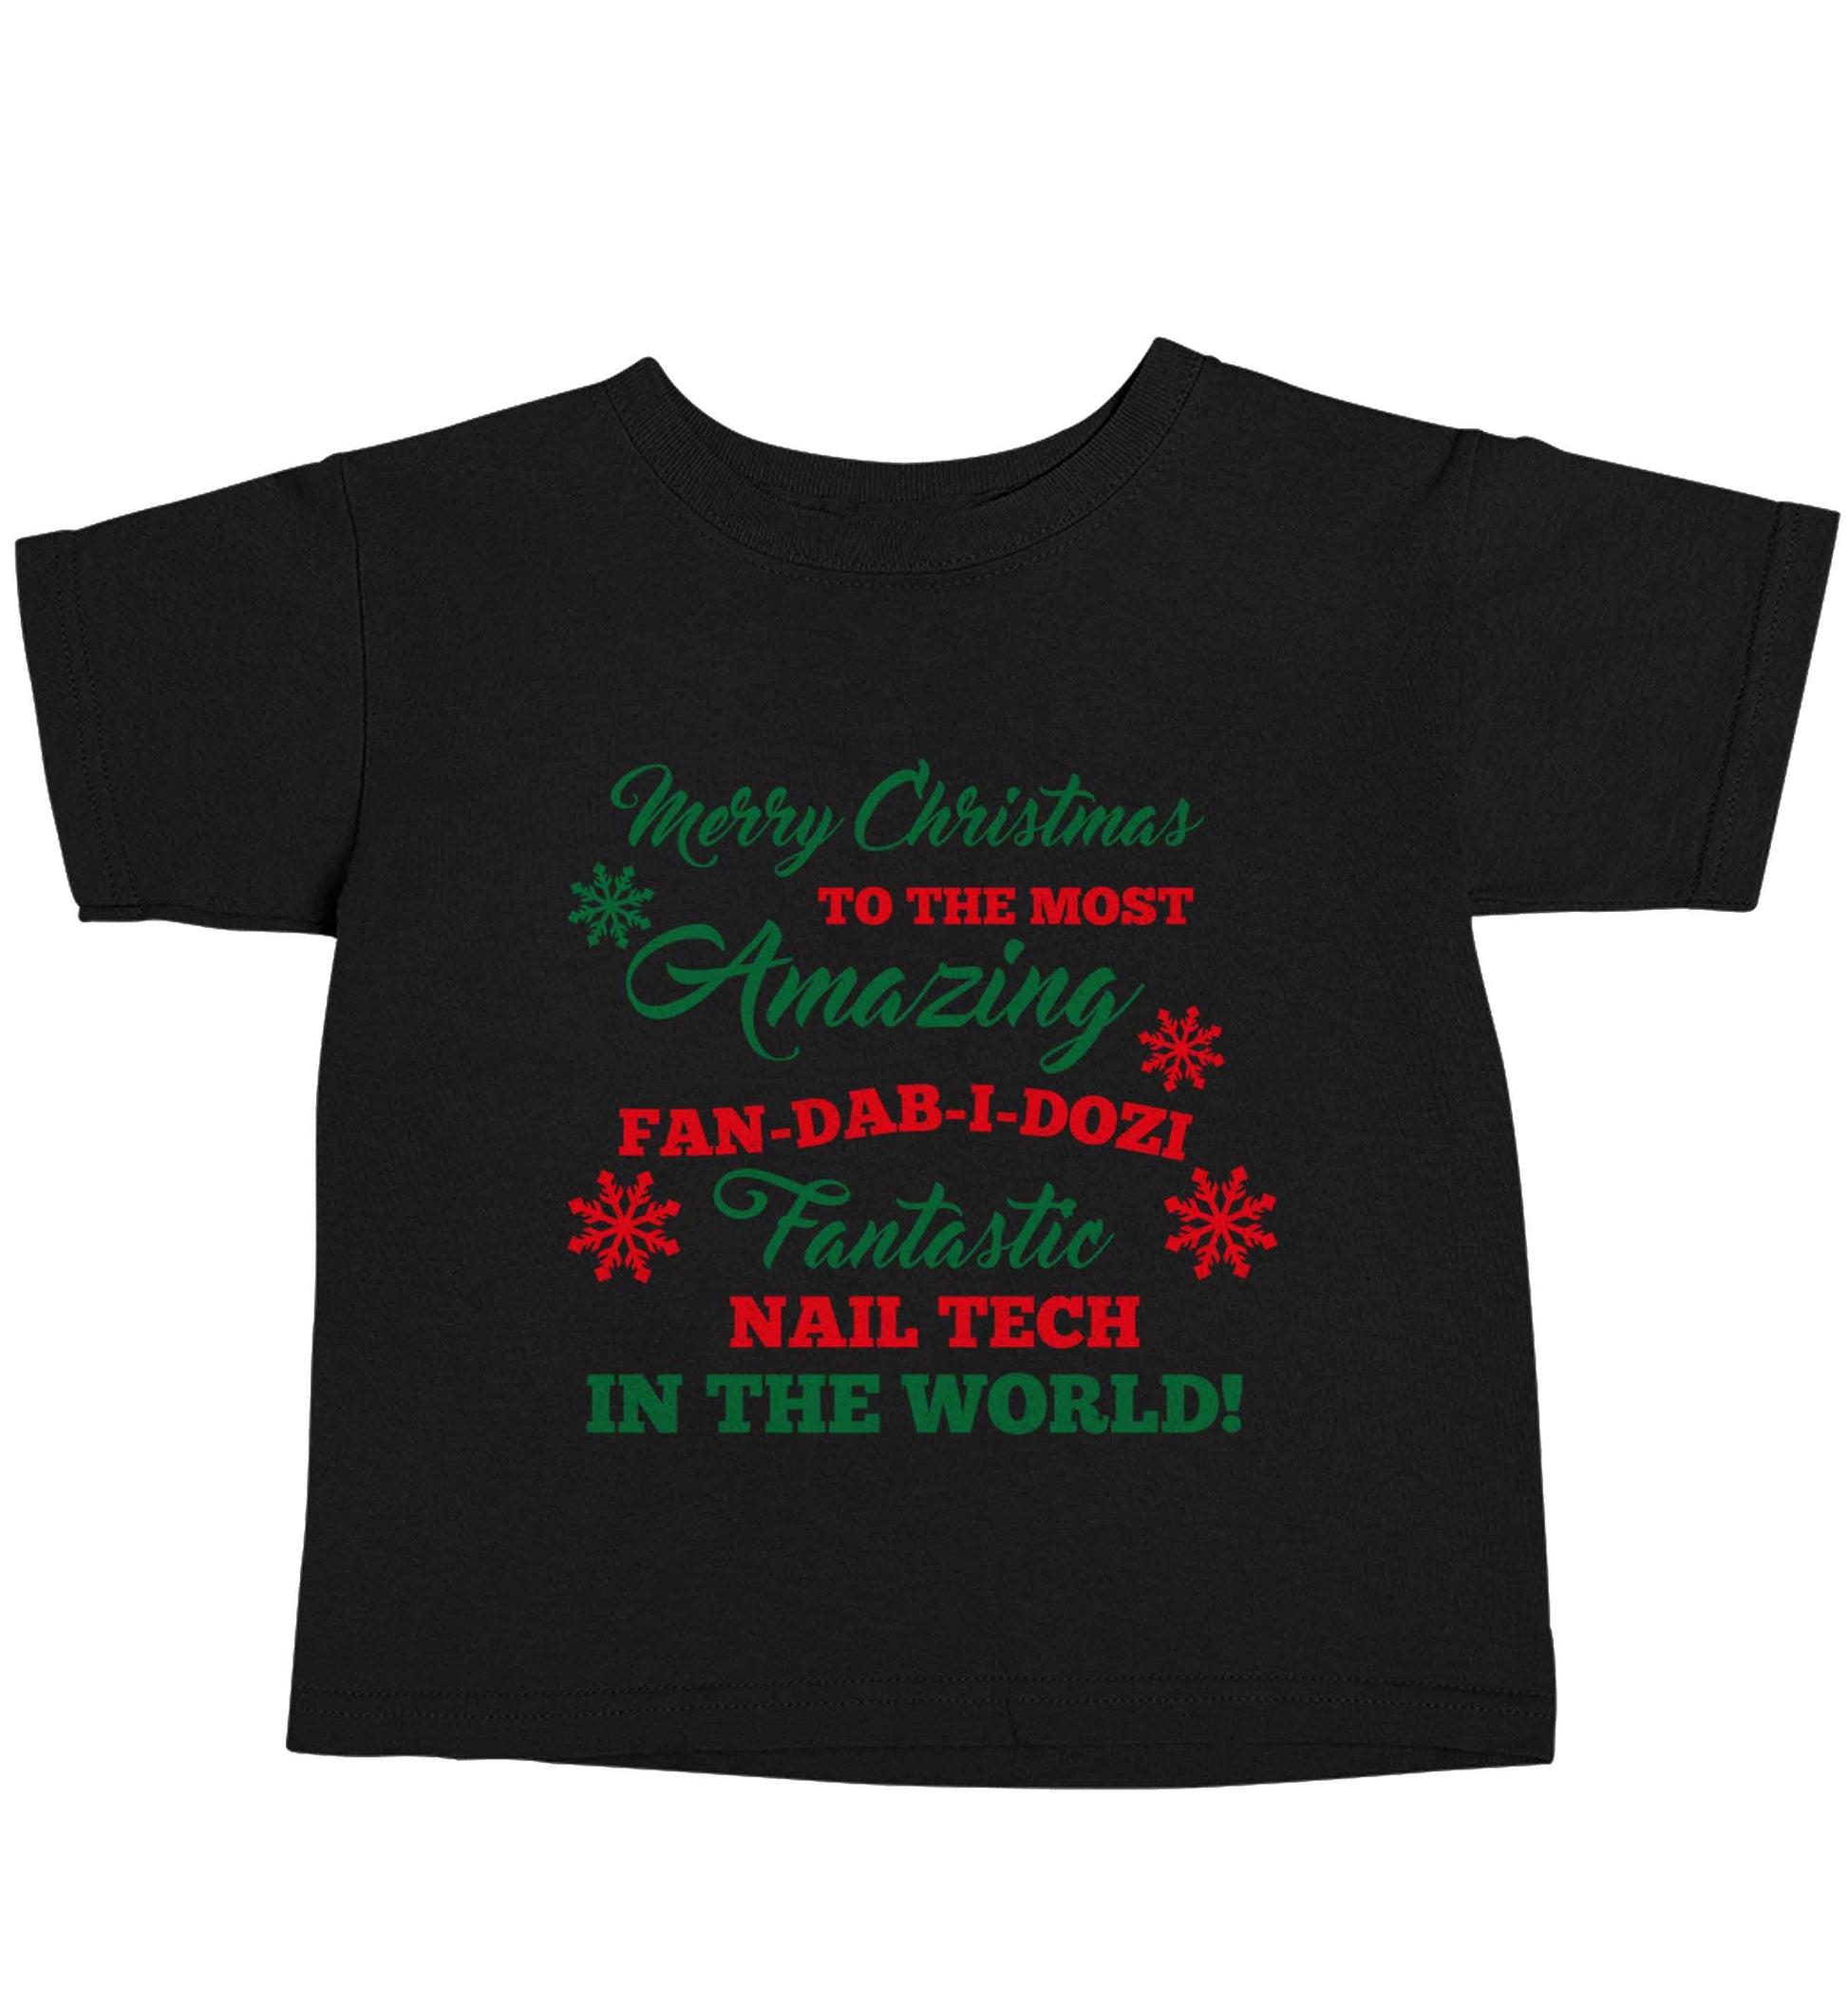 Merry Christmas to the most amazing fan-dab-i-dozi fantasic nail technician in the world Black baby toddler Tshirt 2 years